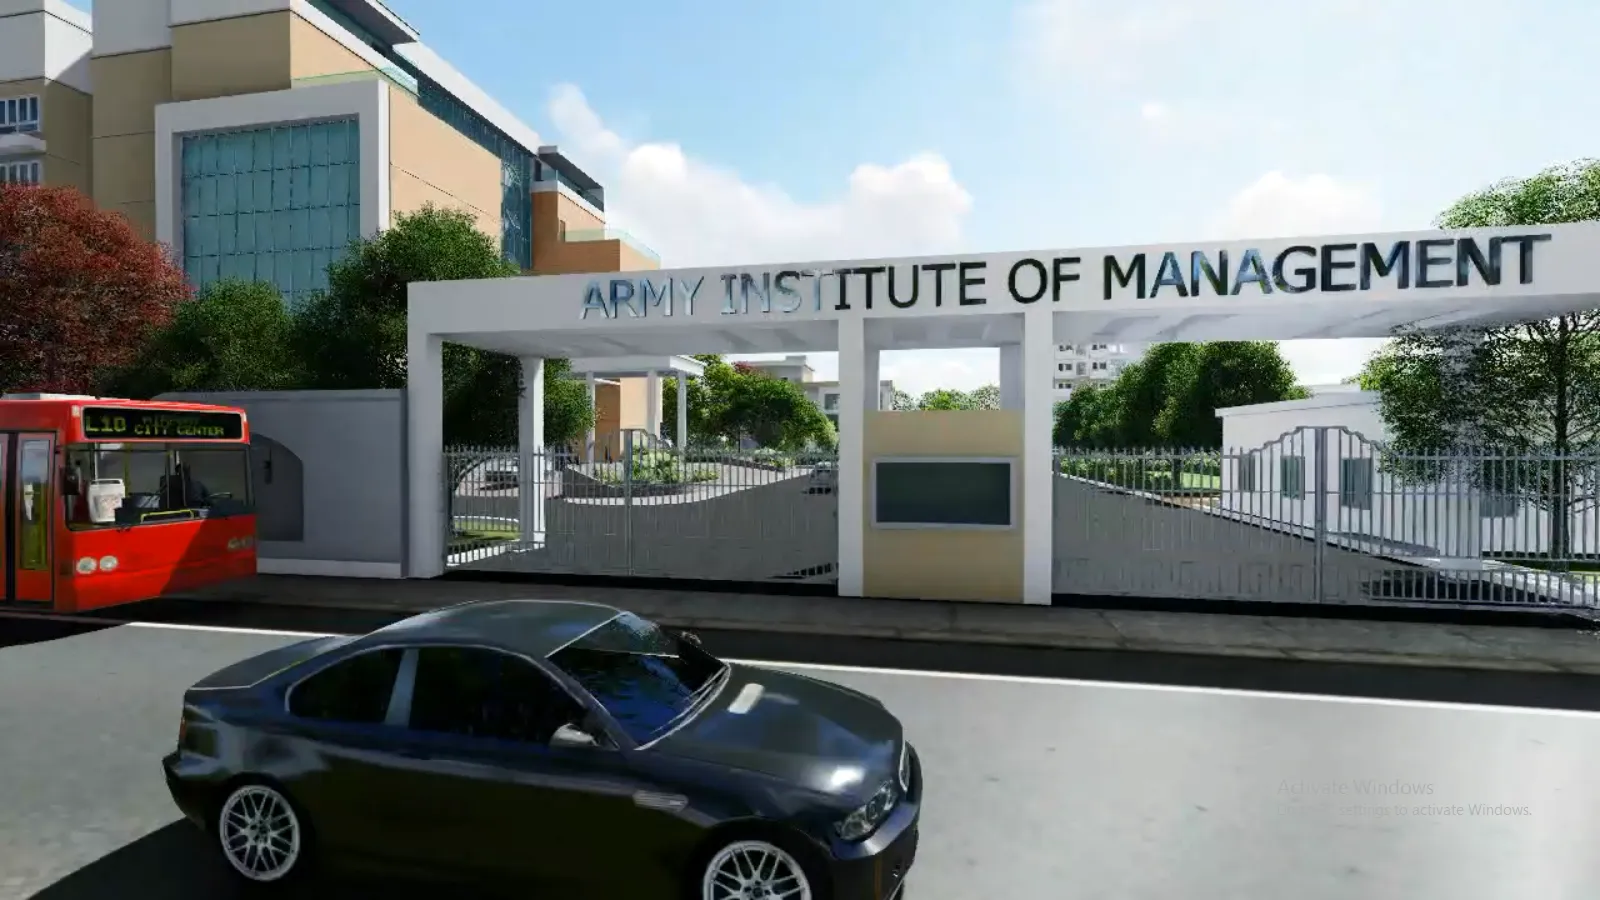 The Army Institute of Management, Kolkata